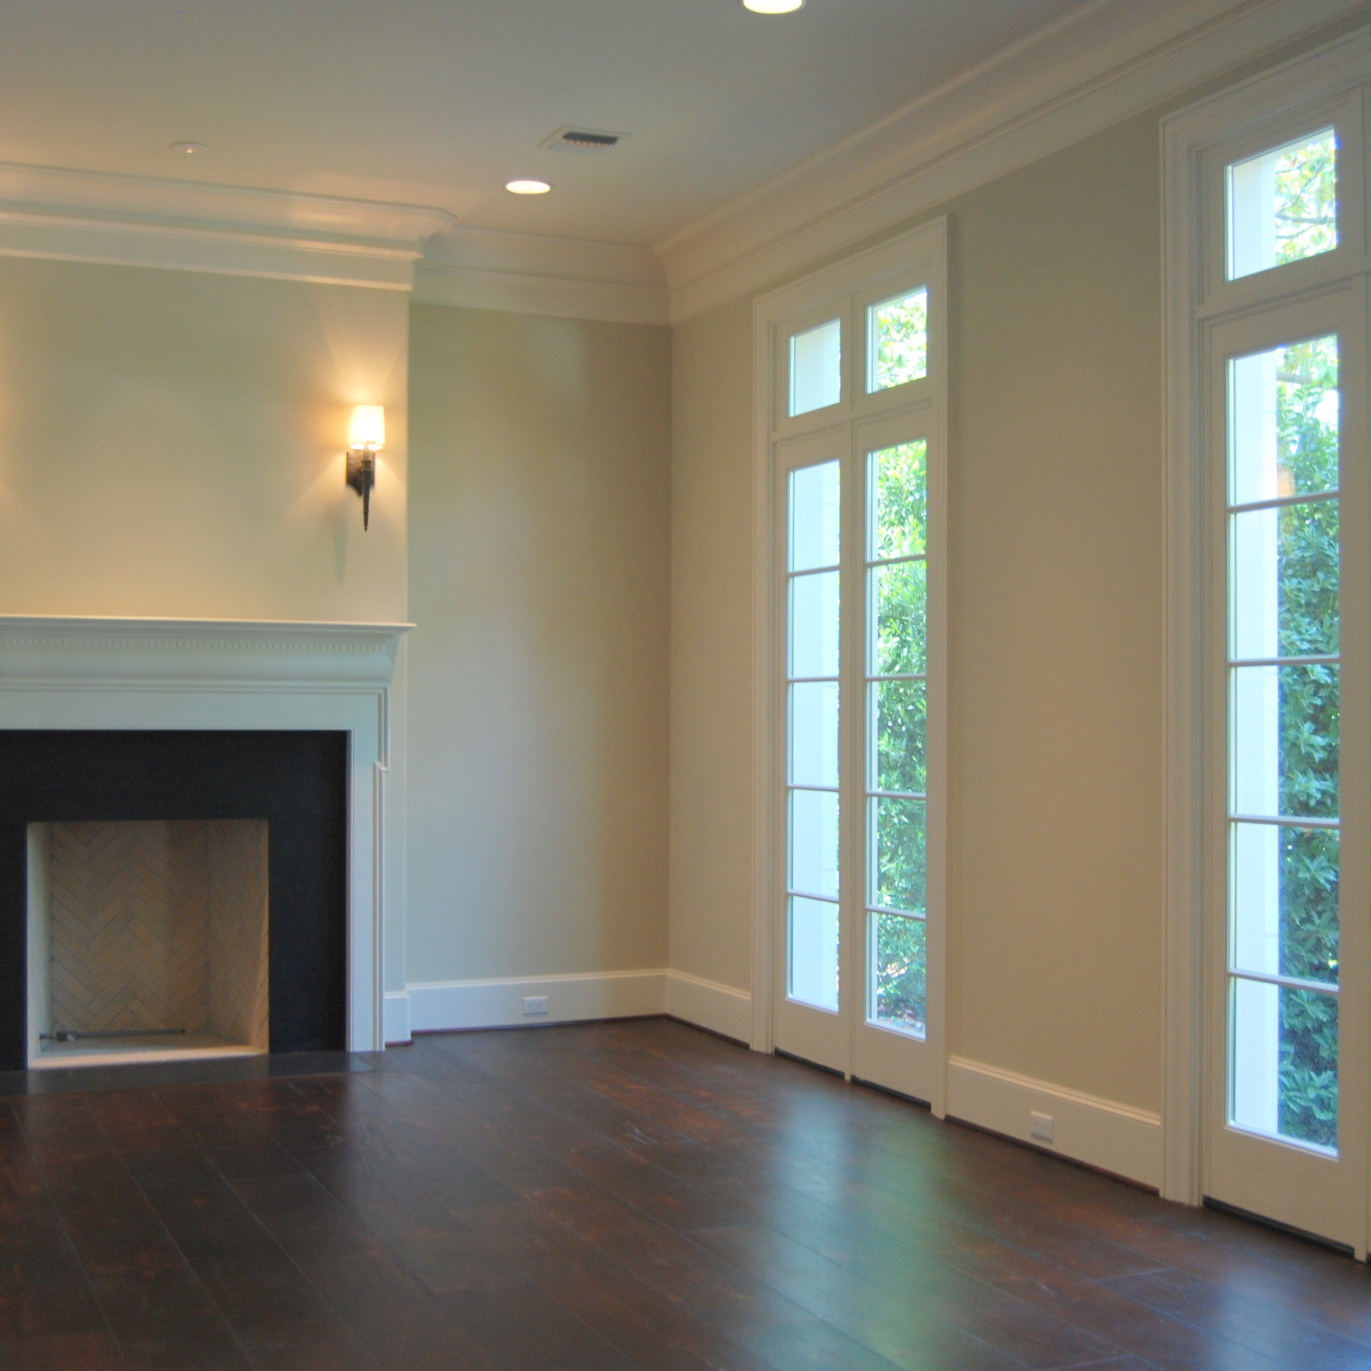 Newly remodeled living room with a fireplace